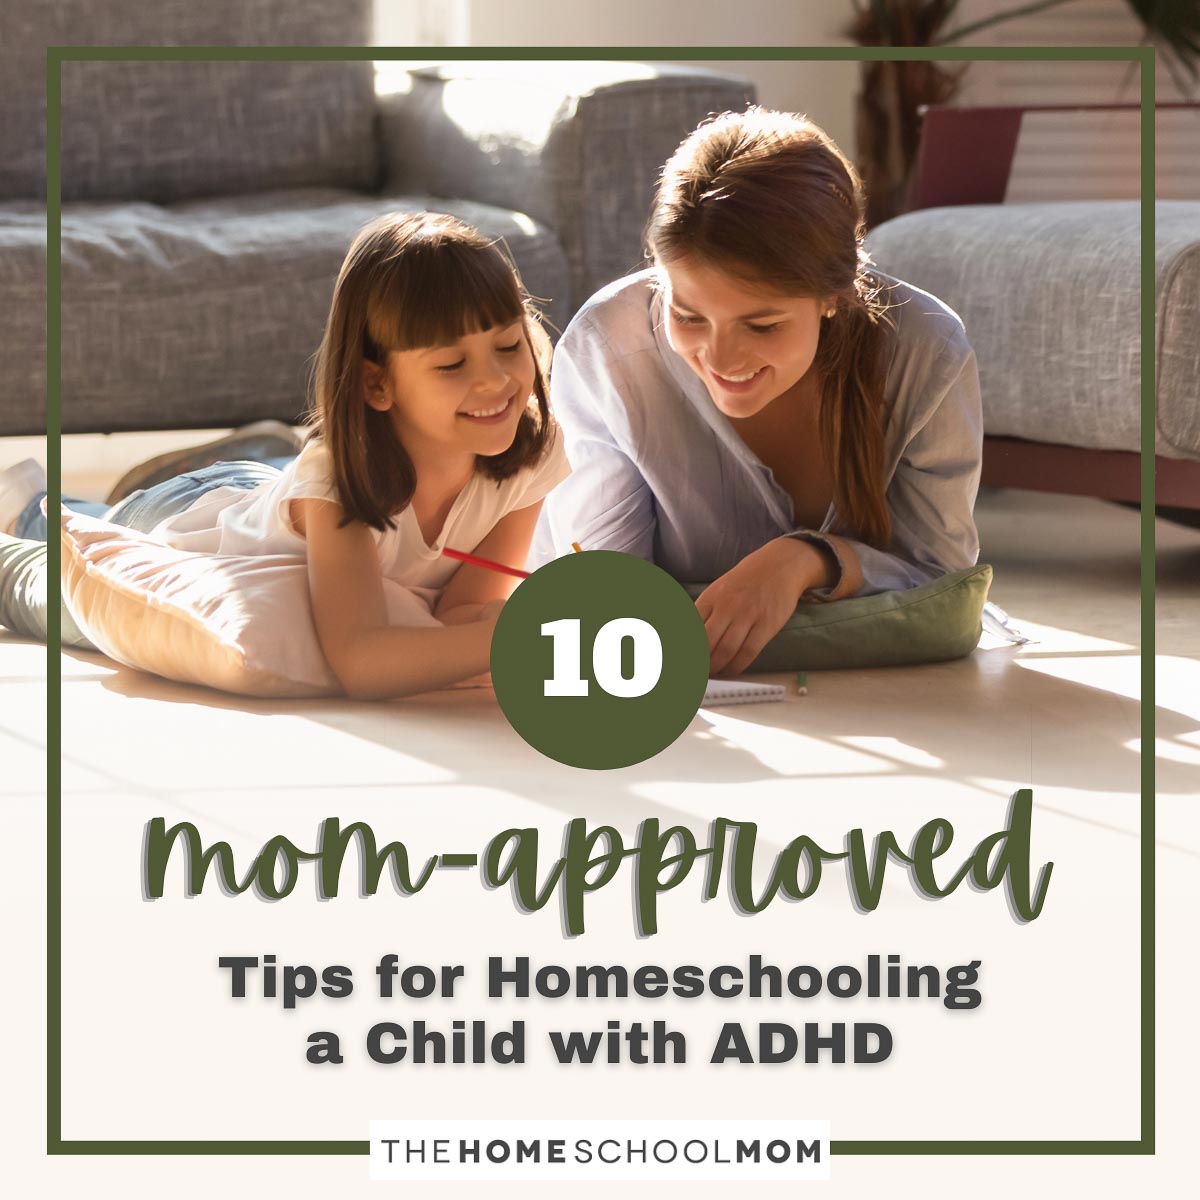 10 Mom-approved tips for homeschooling a child with ADHD